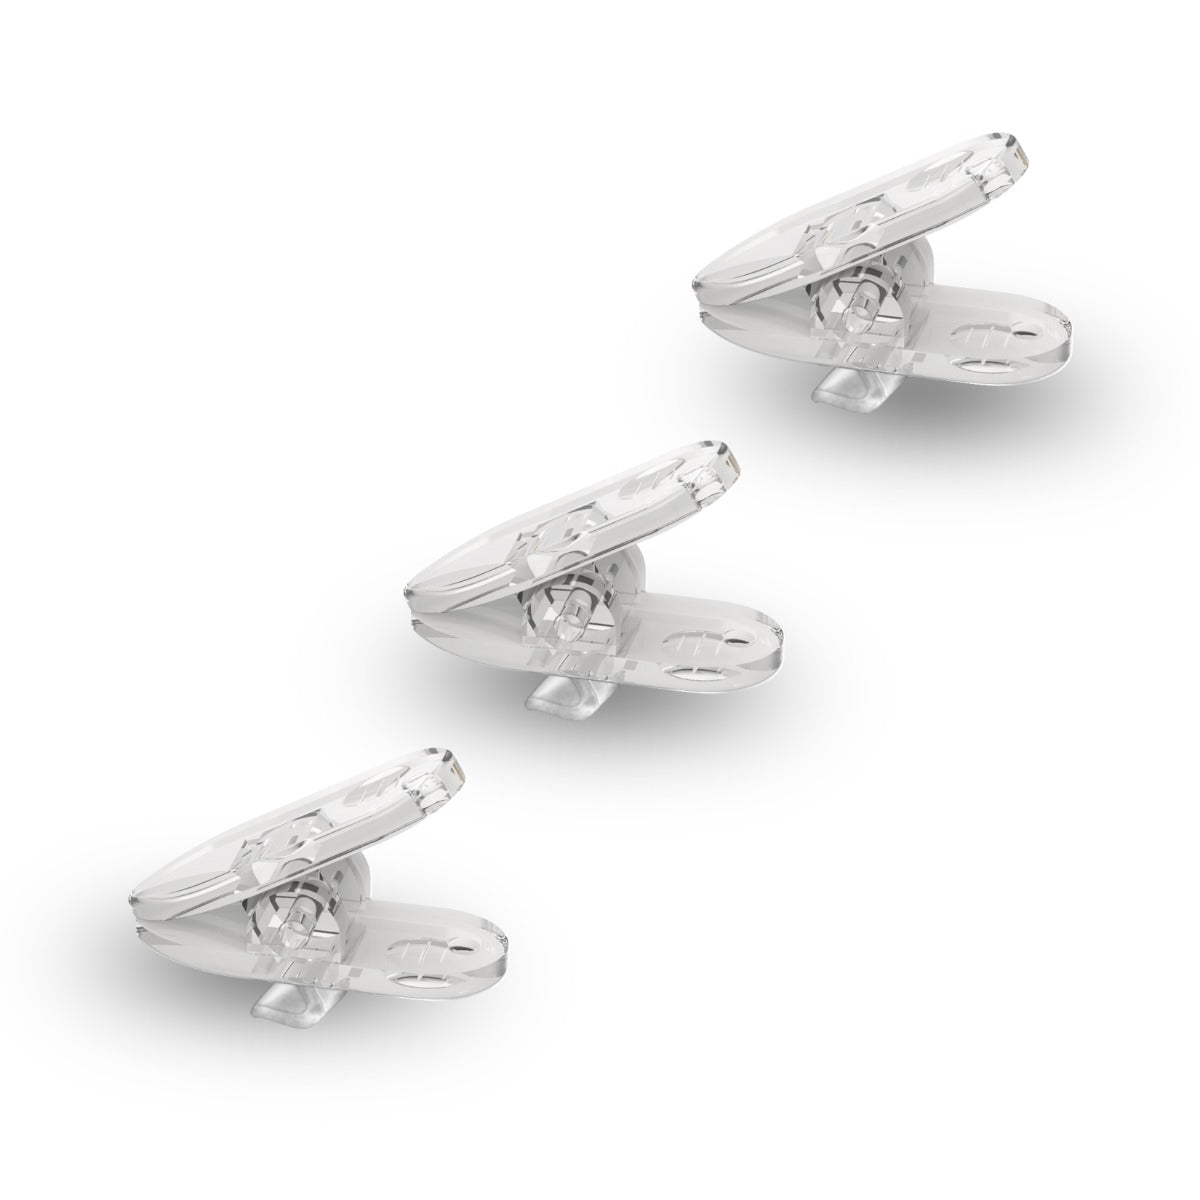 Image of Shirt Clip for Earphones and In-Ear Monitors (3 Piece Set).